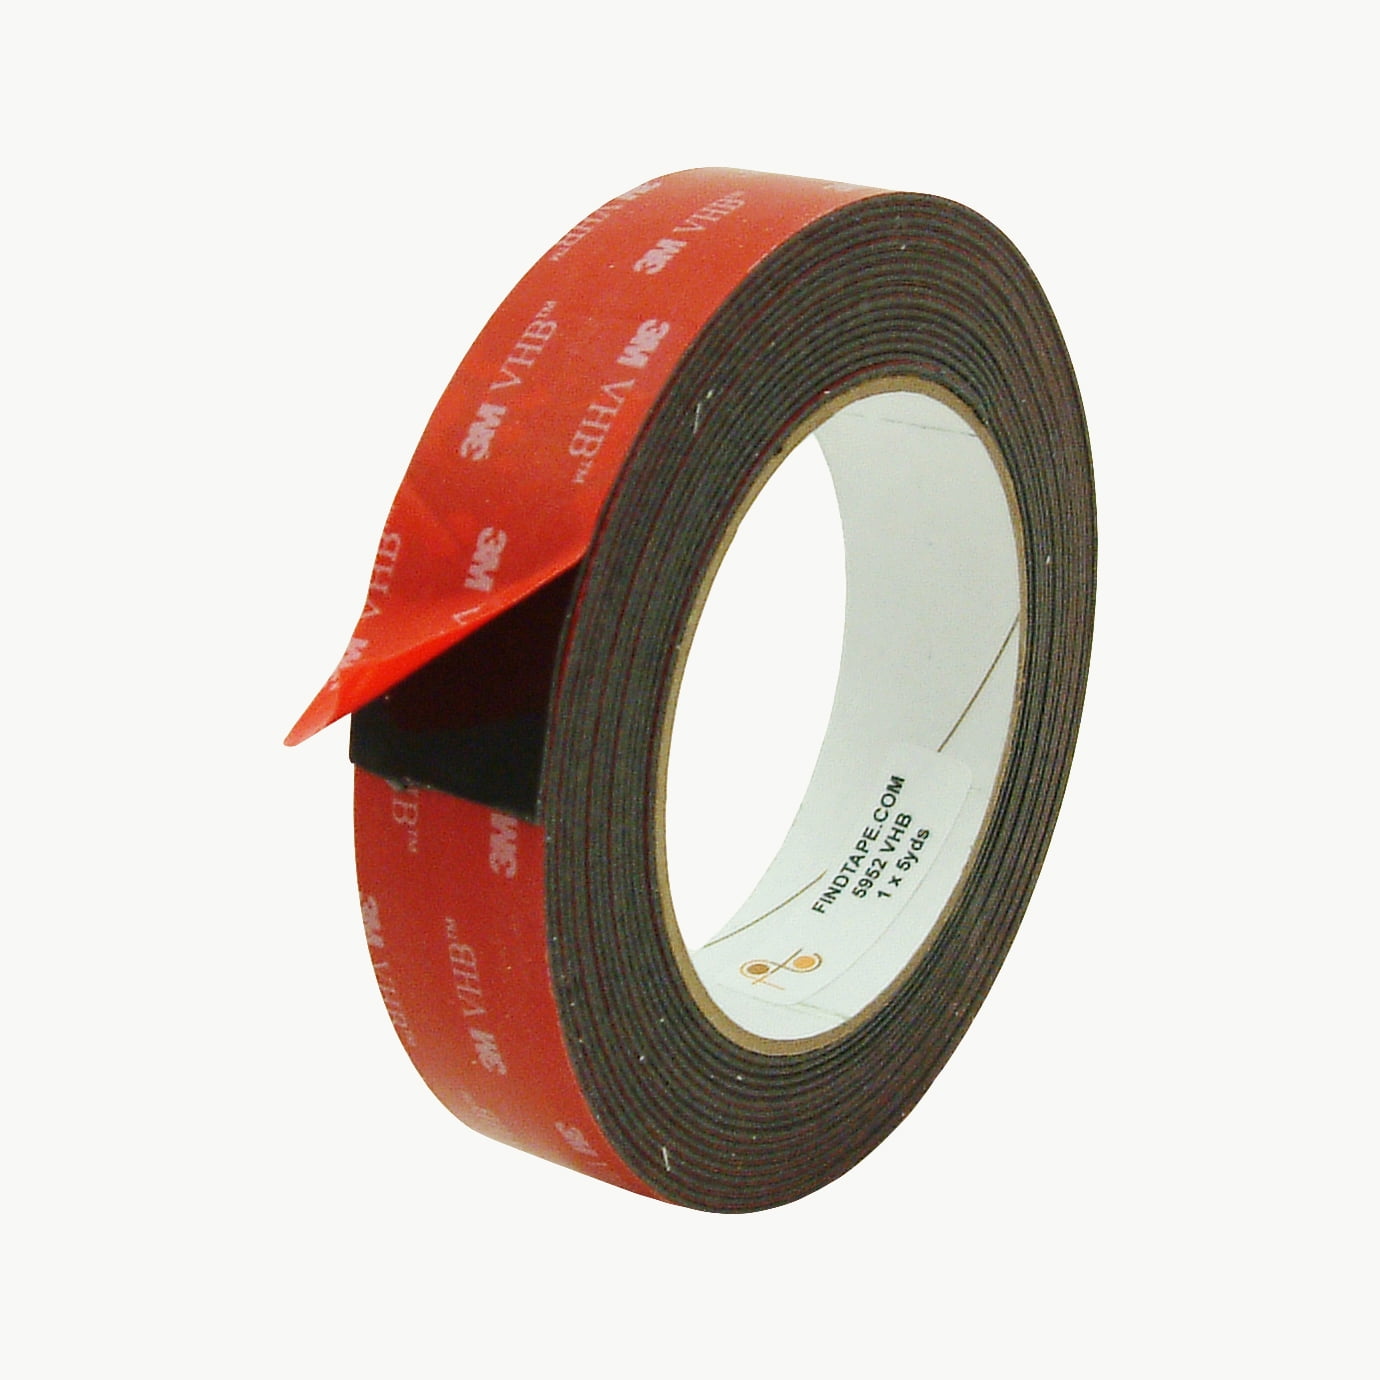 Black 3M Scotch 5952 VHB Double Sided Tape x 15 ft. 1/2 in 